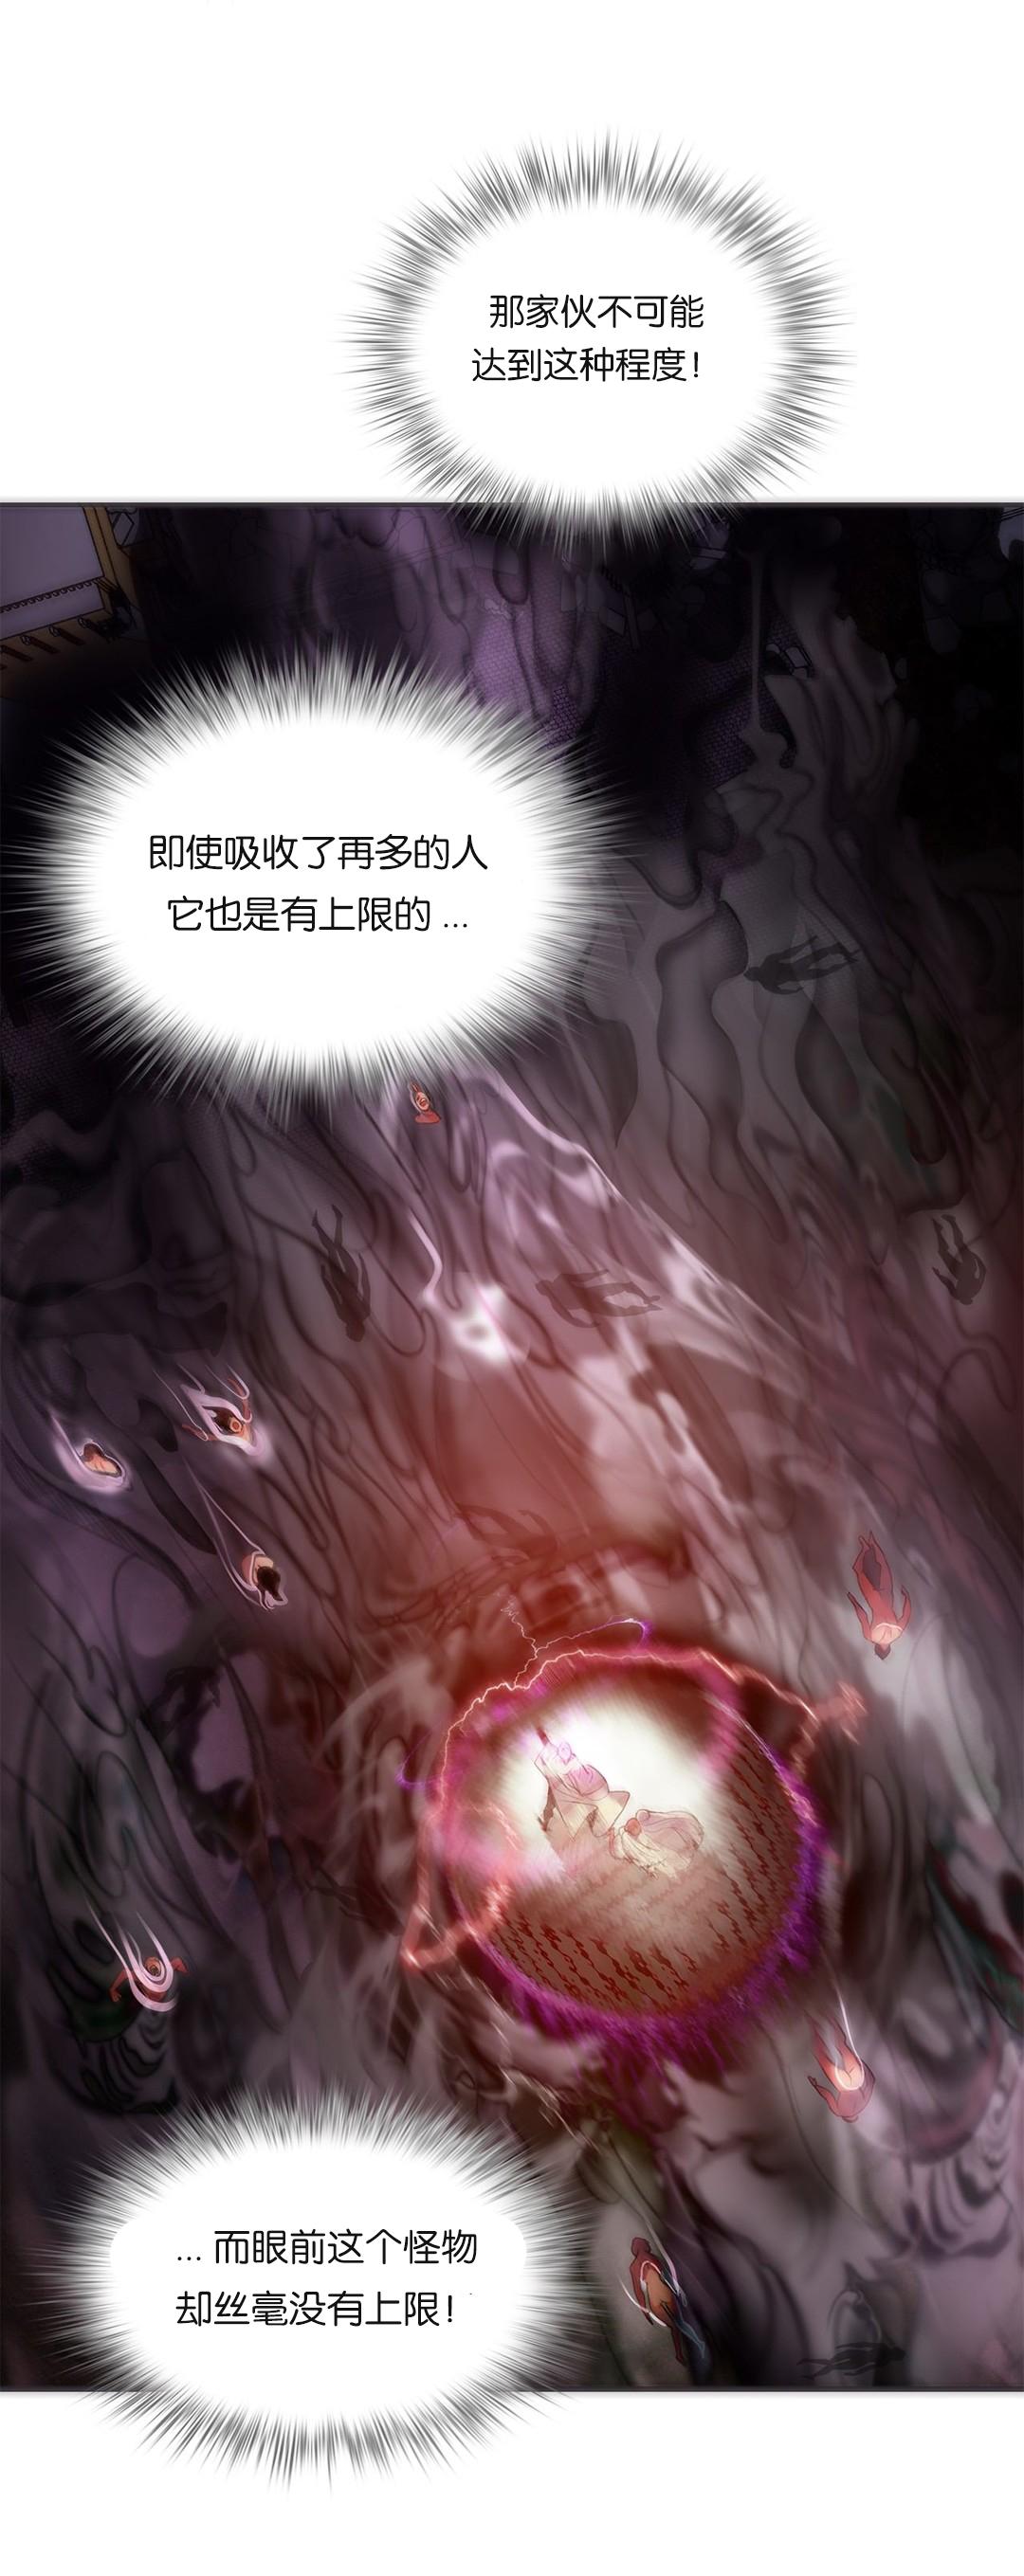 [Juder] Lilith`s Cord (第二季) Ch.61-62 [Chinese] [aaatwist个人汉化] [Ongoing] 21